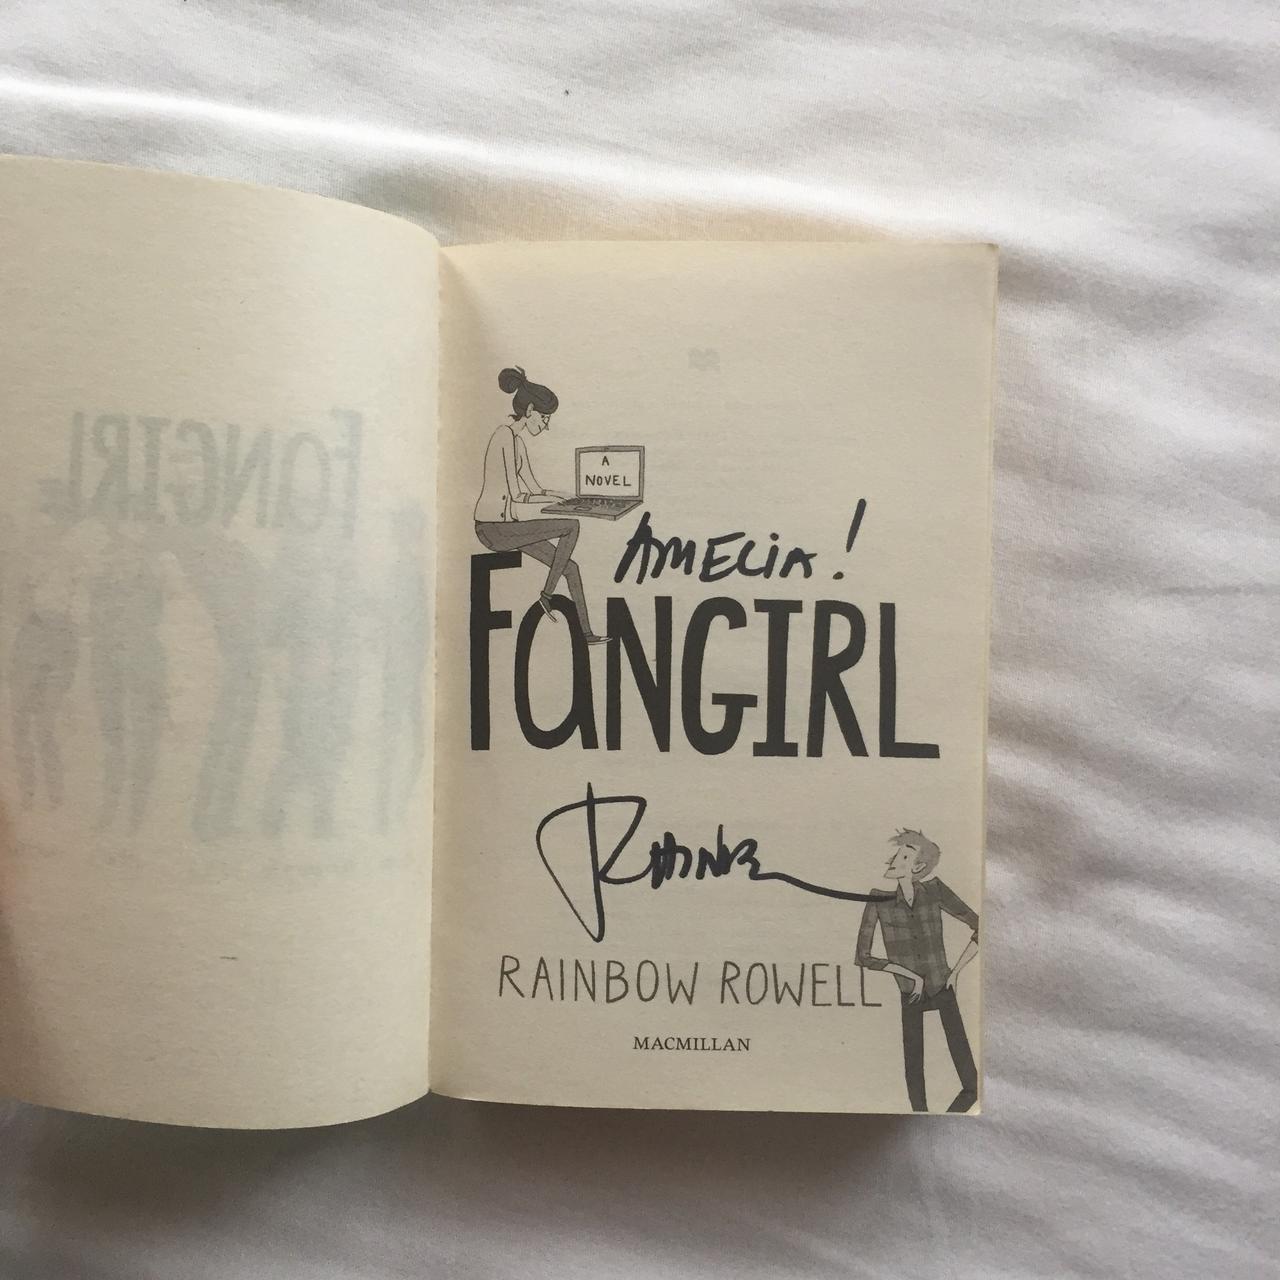 Fangirl by rainbow Rowell signed by the author